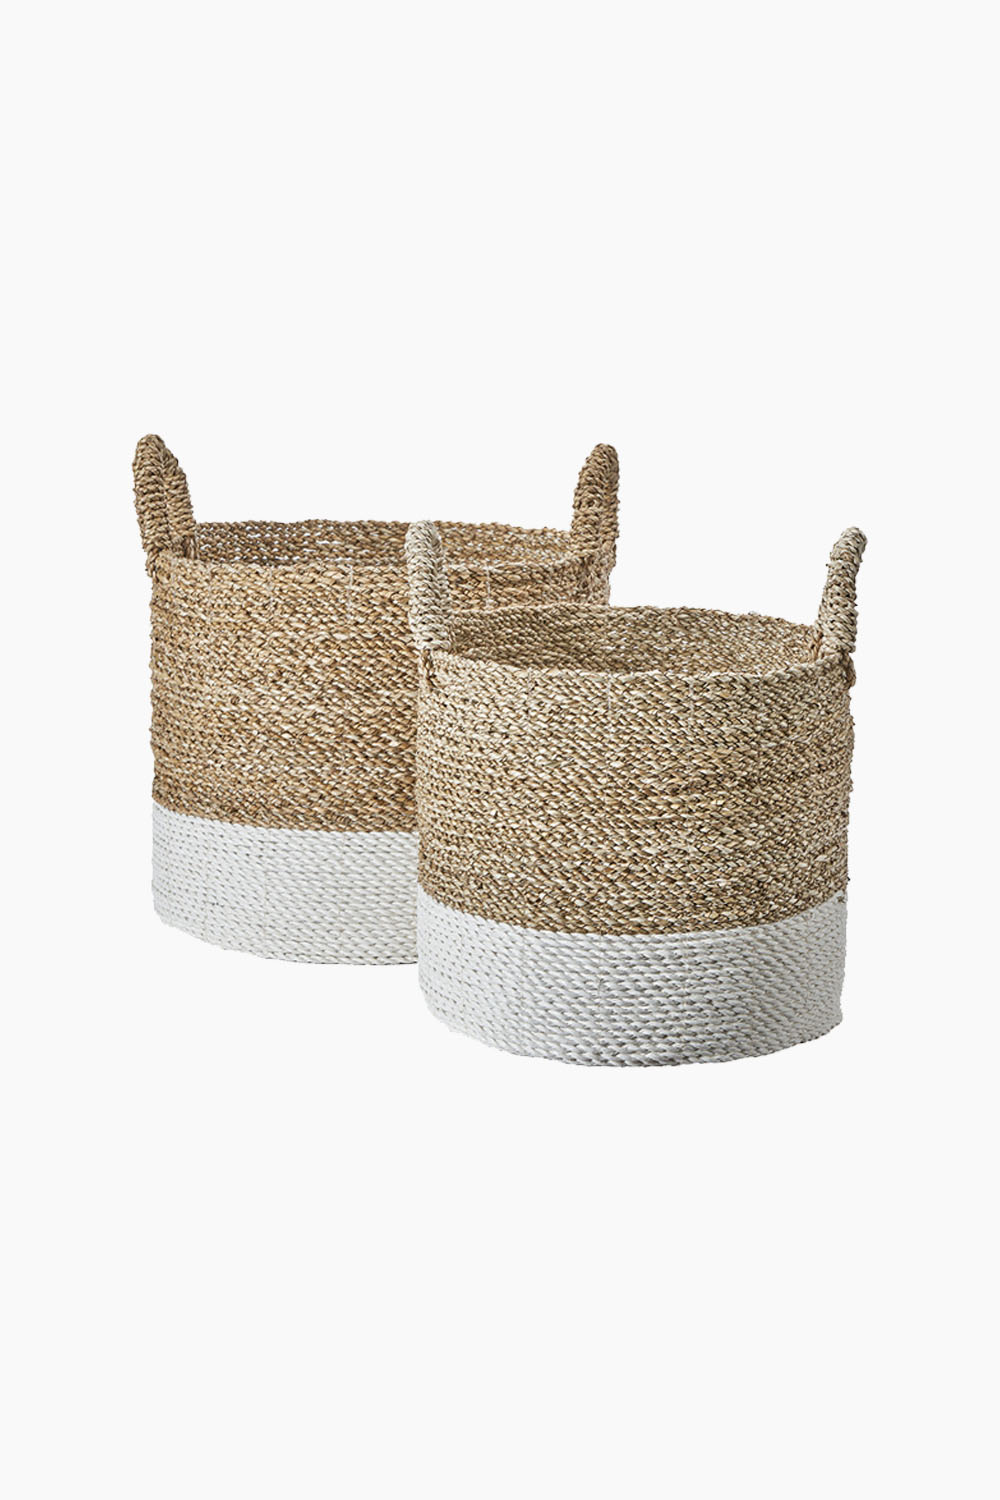 Banana Leaf Two Tone Natural and White Baskets Set of 2